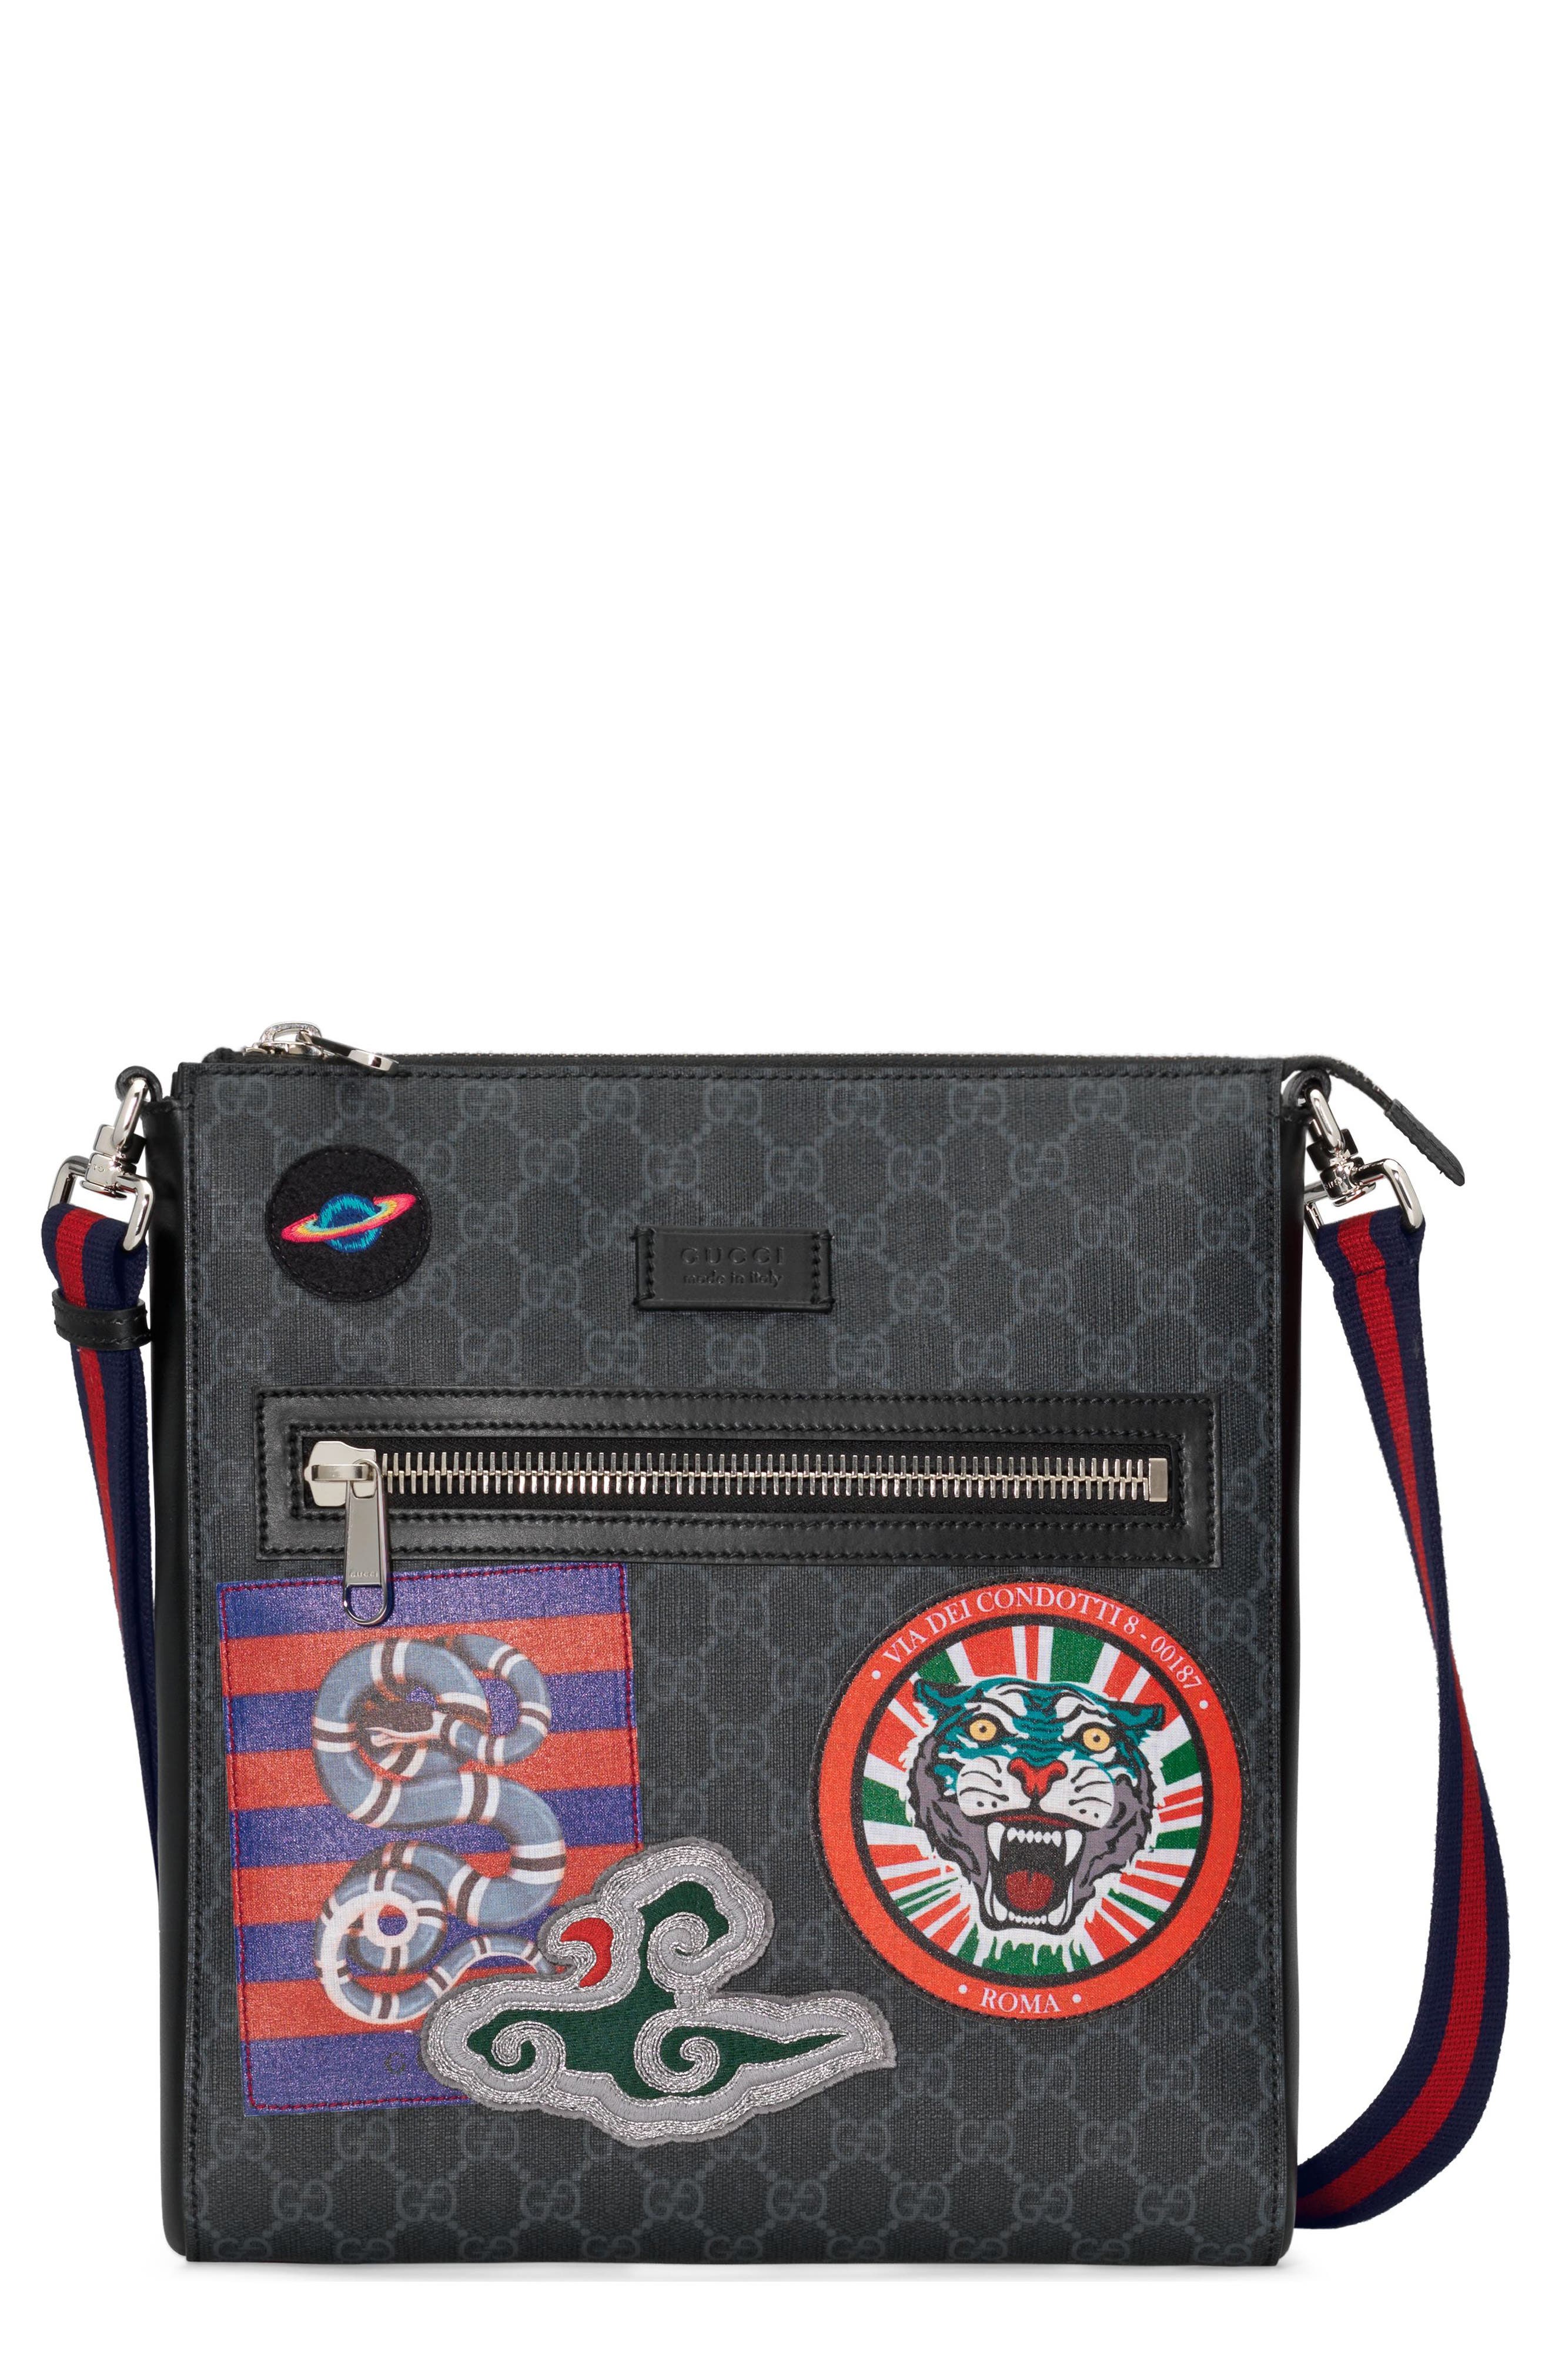 Gucci Messenger Bag Price Online Sale, UP TO 69% OFF